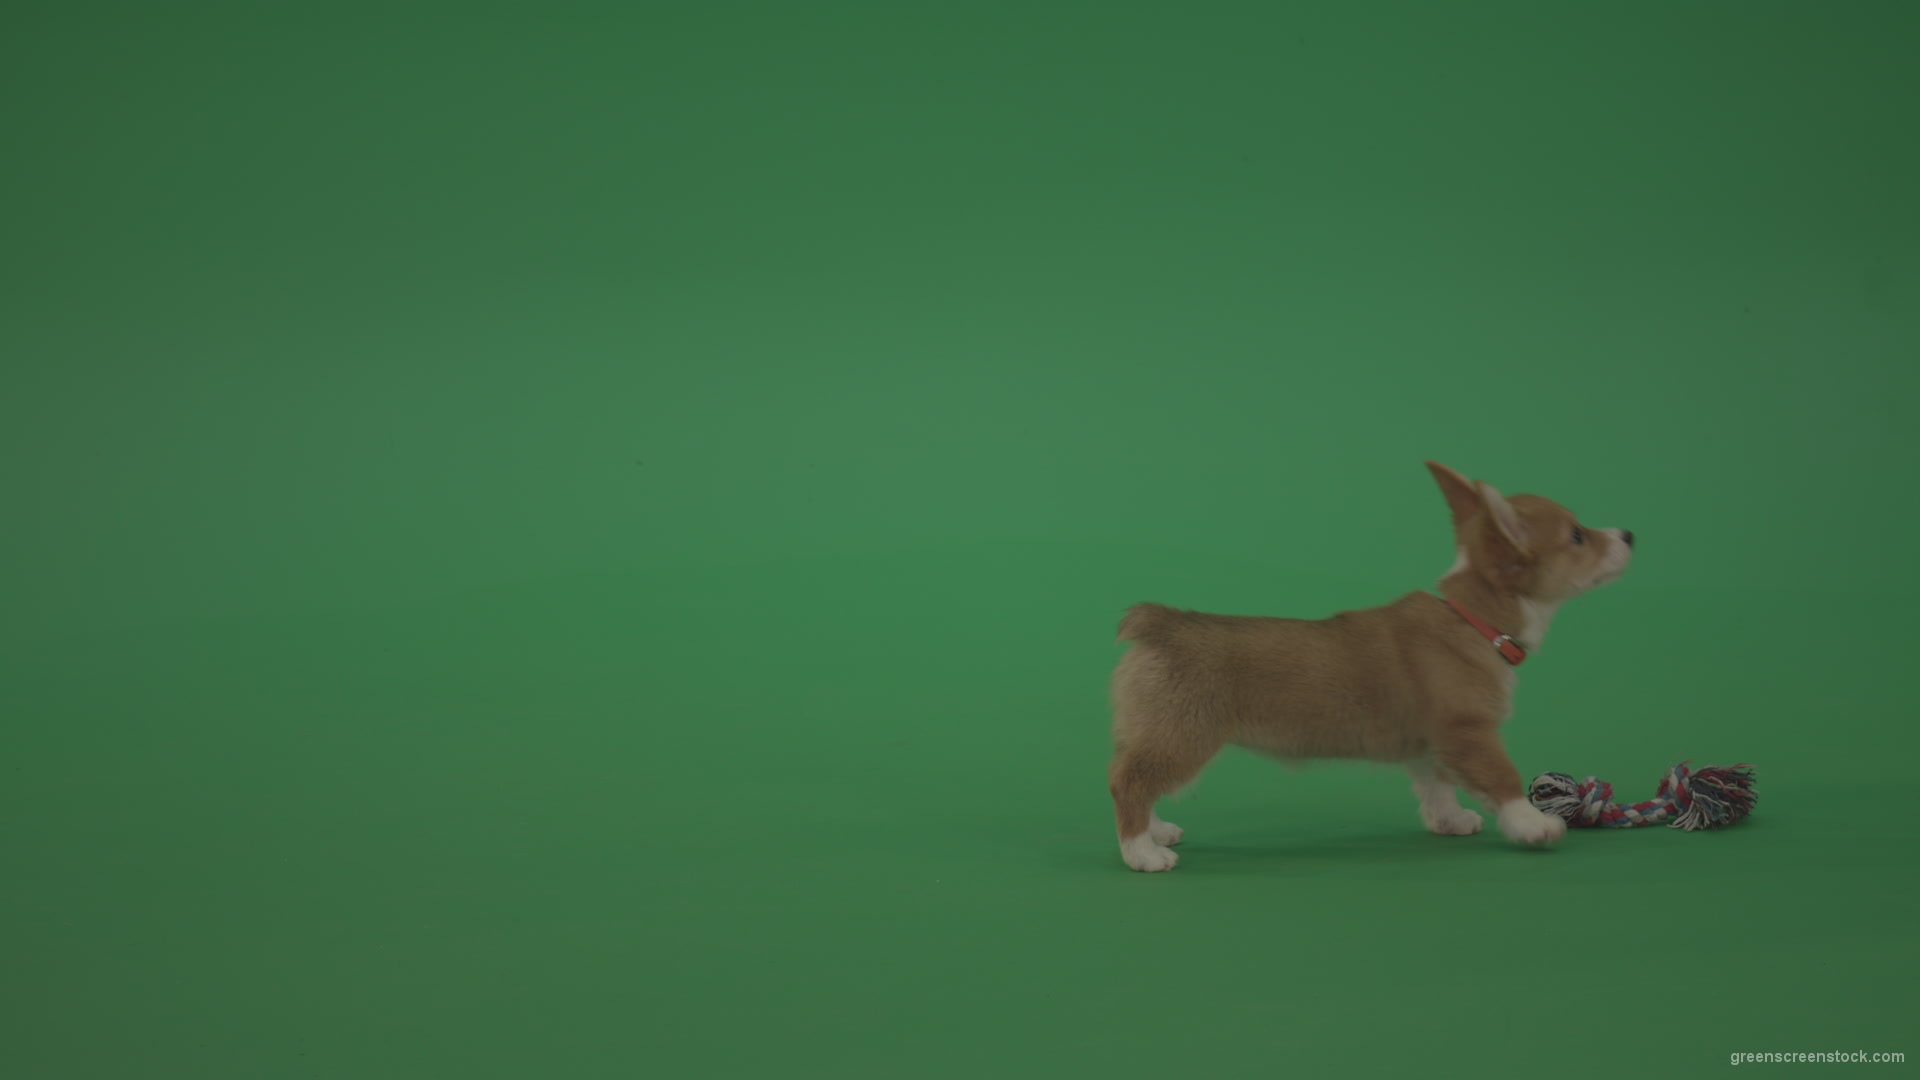 Small-toy-Korgi-welsh-dog-play-with-doll-on-green-screen-isolated_007 Green Screen Stock